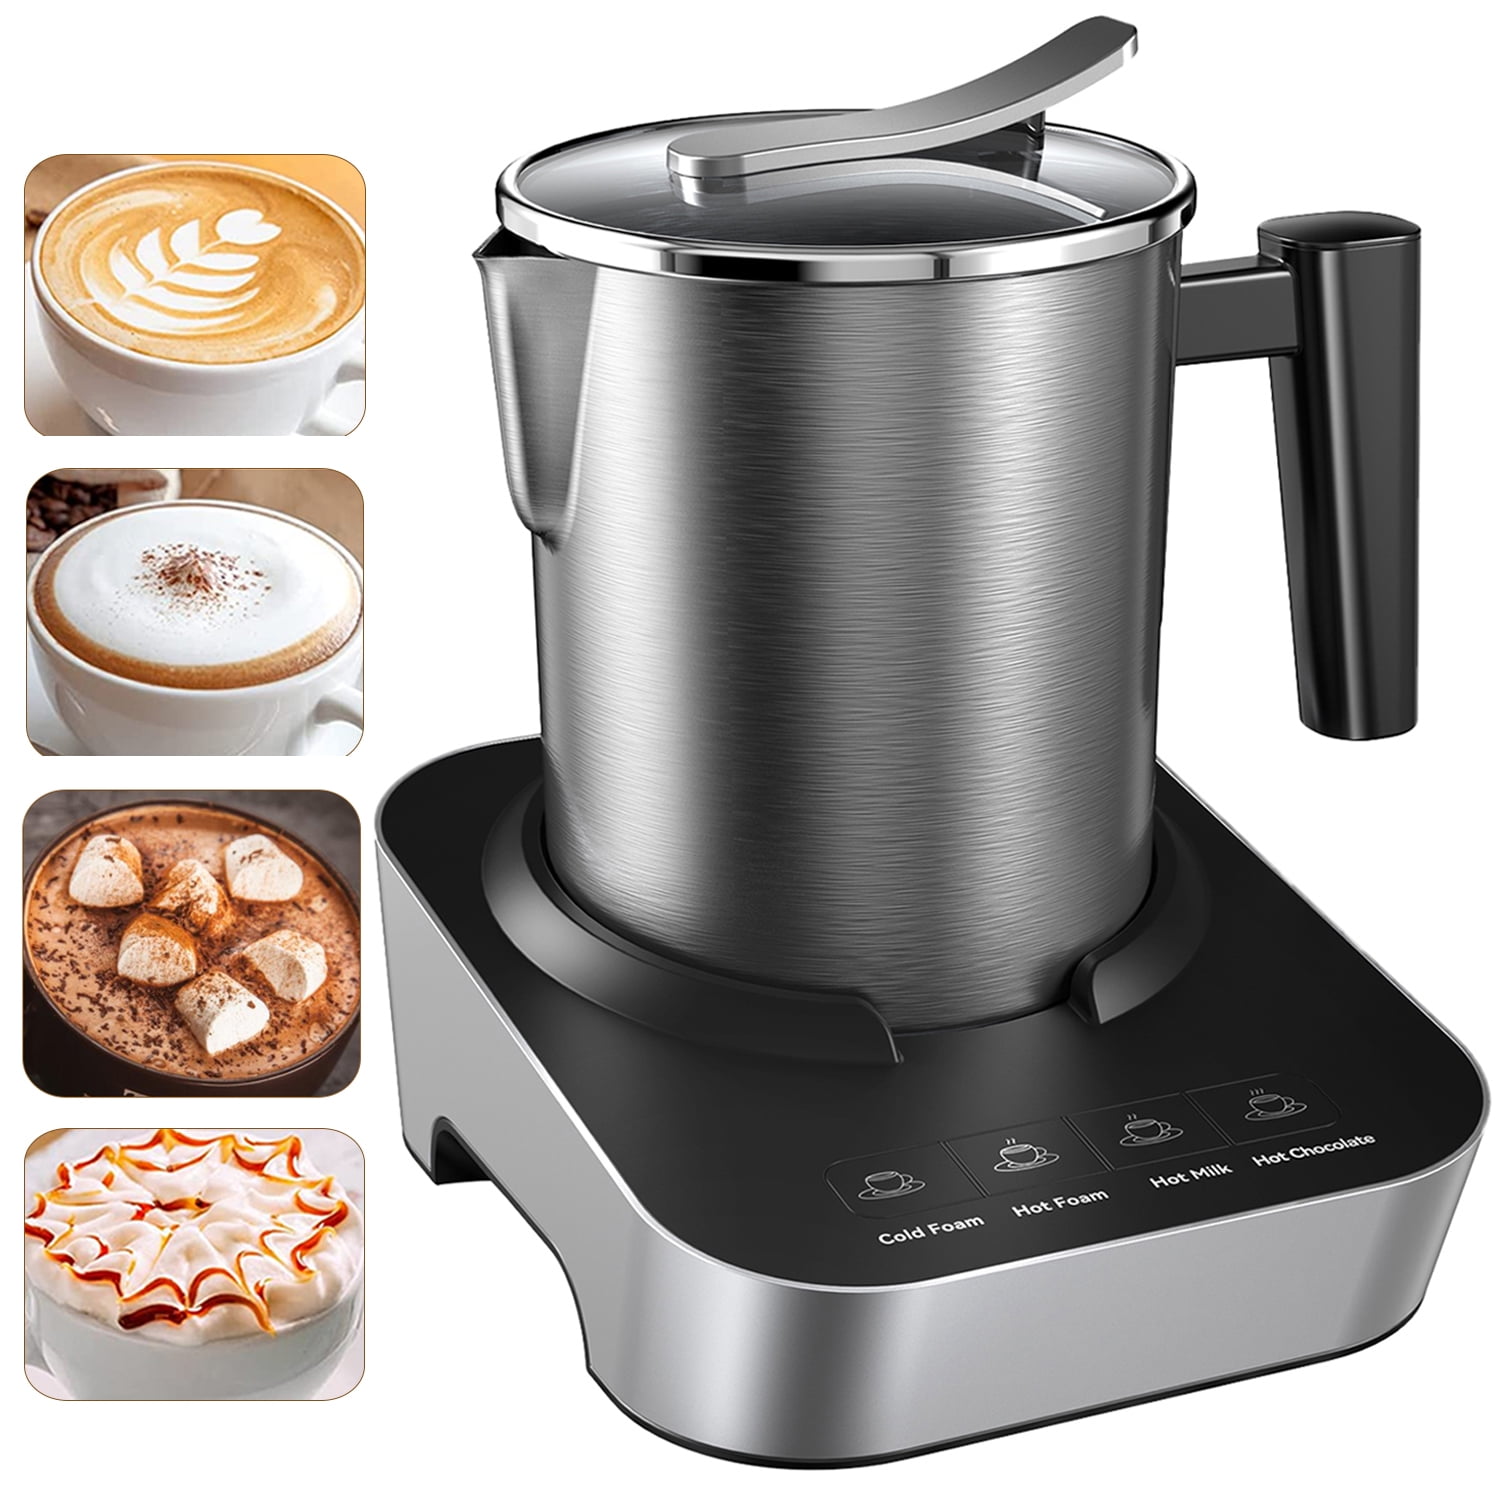 Dropship Frother For Coffee, Milk Frother, 4 IN 1 Automatic Hot And Cold  Foam Maker, BIZEWO Stainless Steel Milk Steamer For Latte, Cappuccinos,  Macchiato, Hot Chocolate Milk With LED Touch to Sell